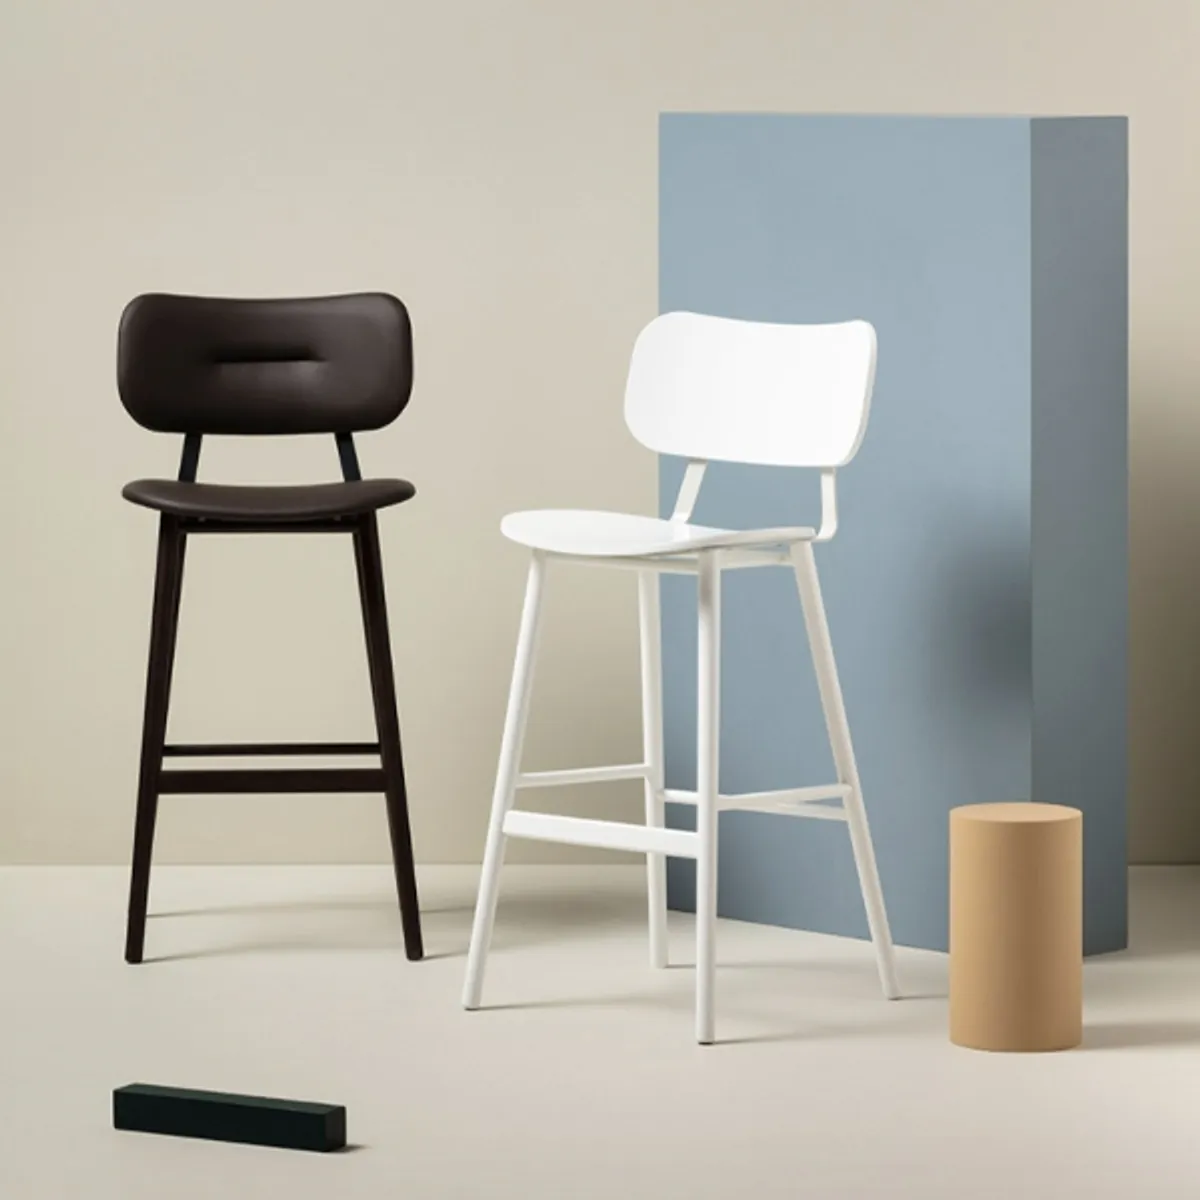 Demie bar stool Inside Out Contracts2